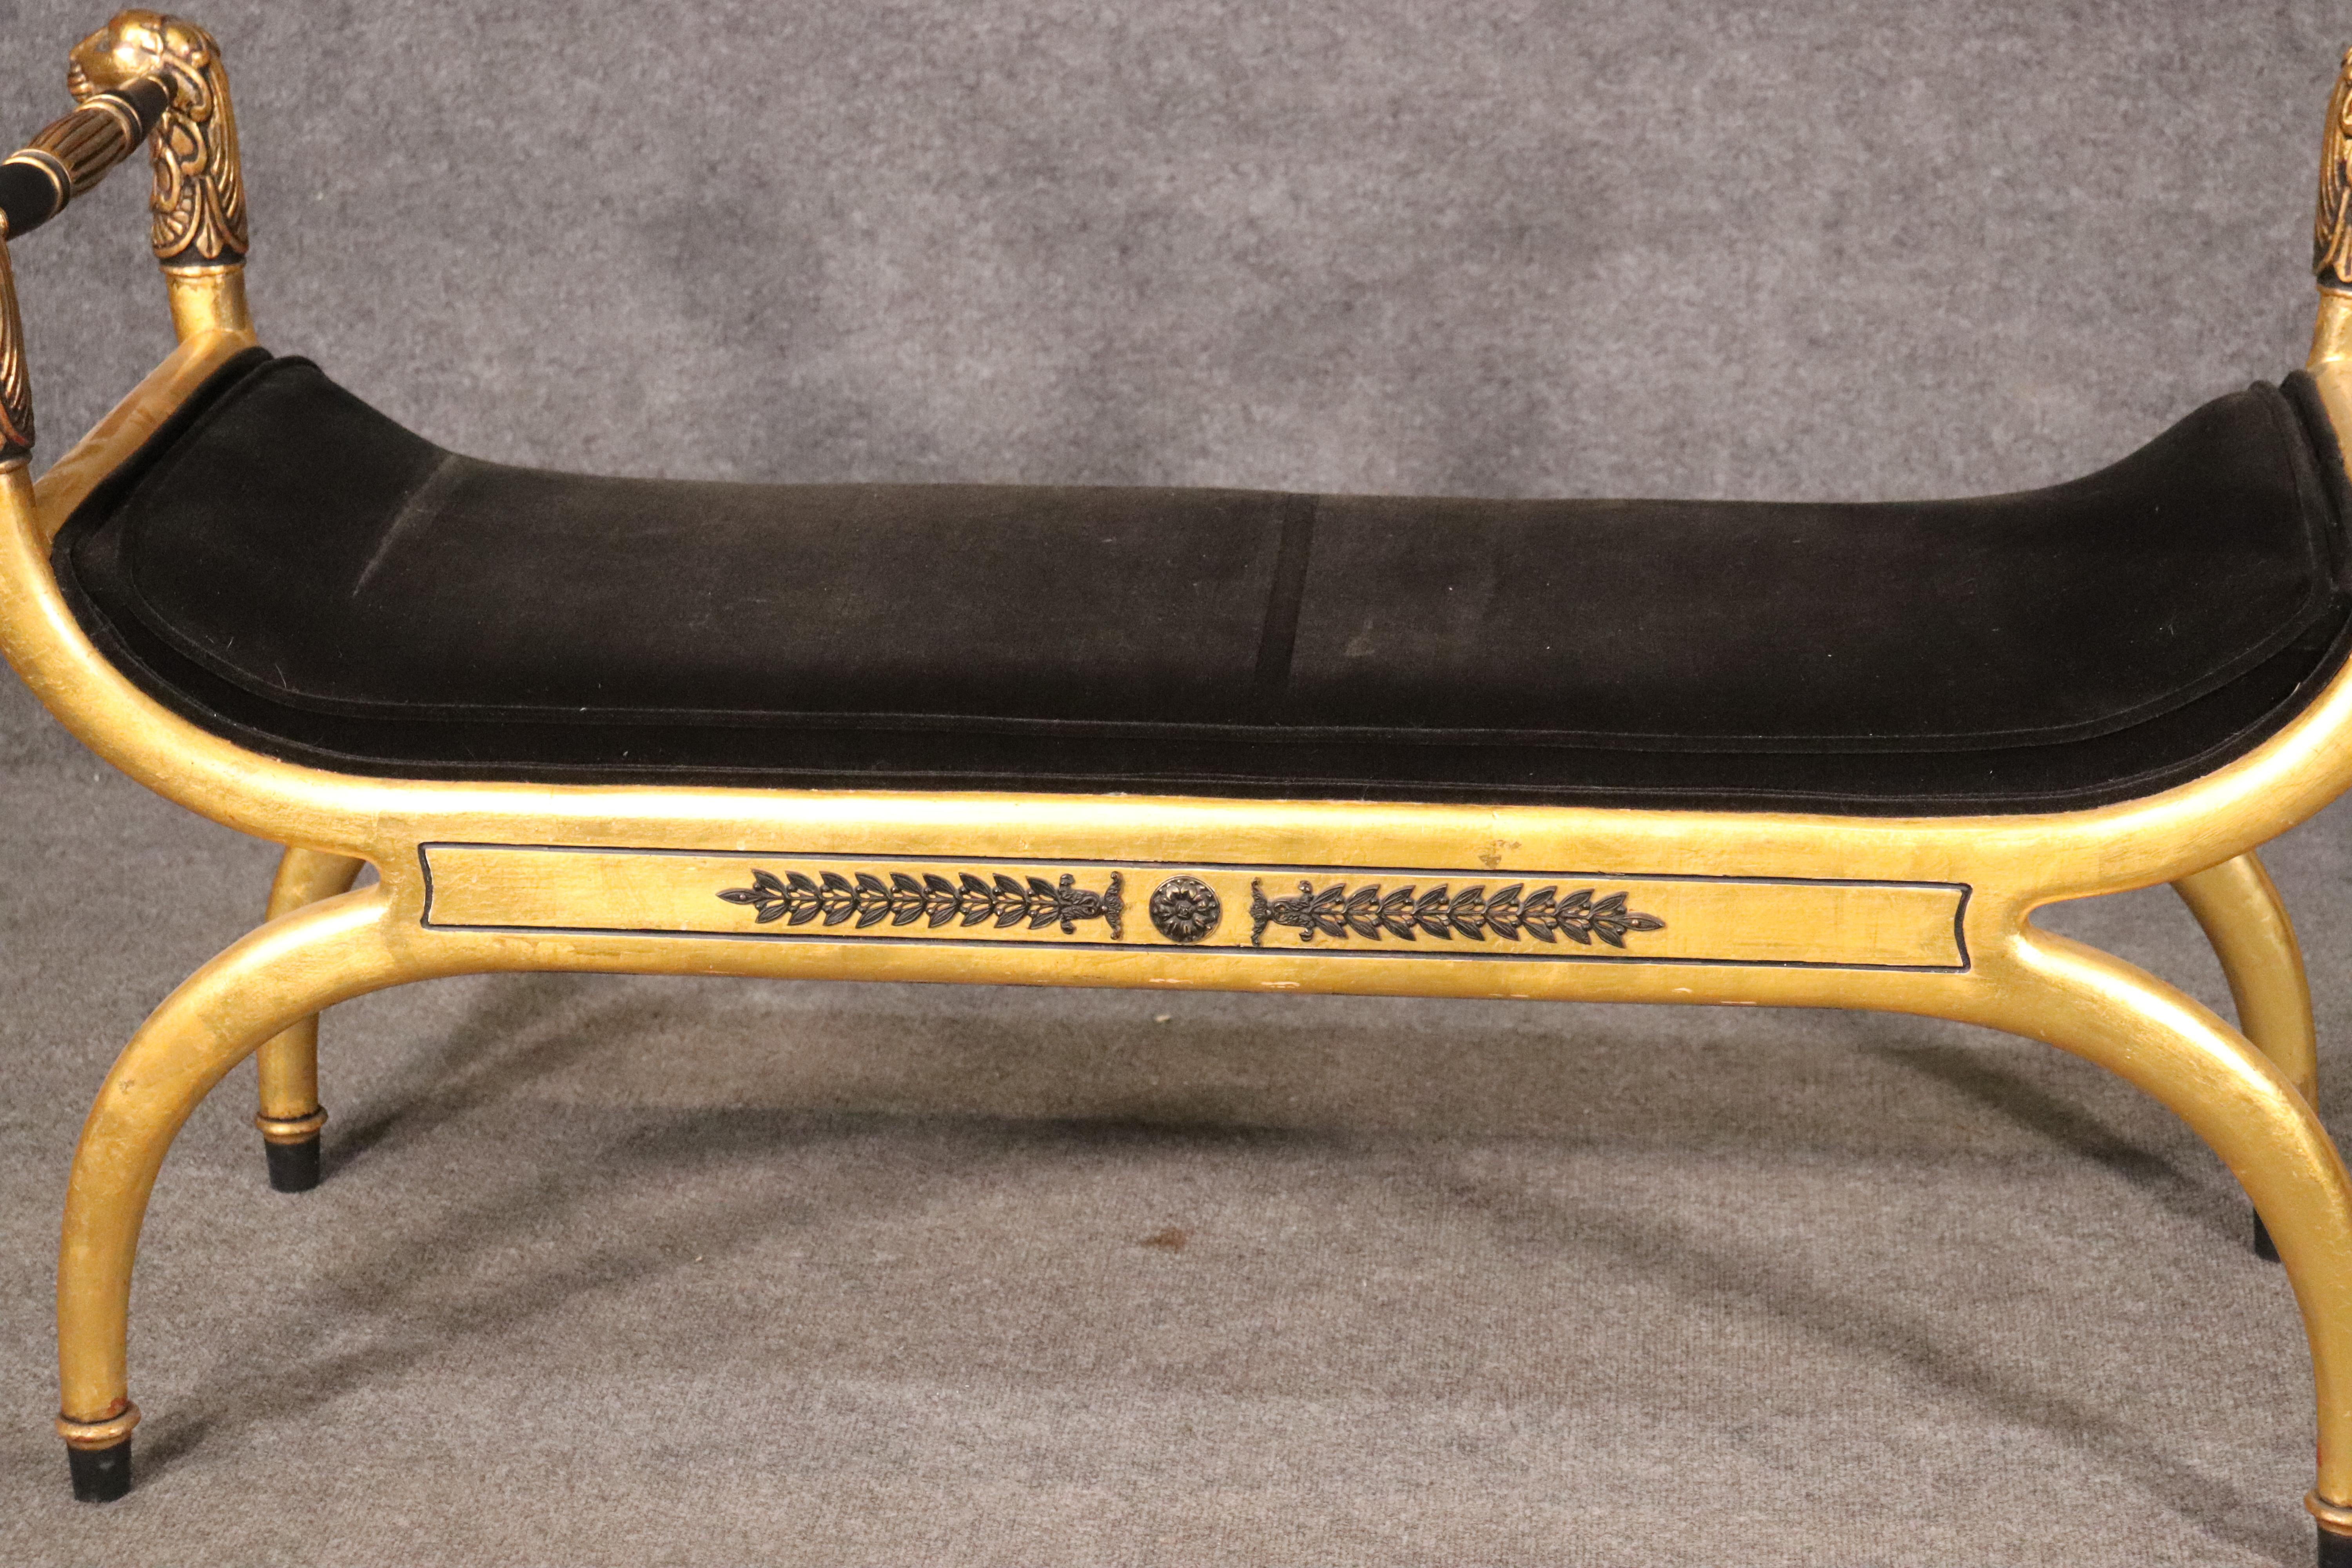 This is a fine luminous gold leafed and bronze mounted lion carved French or perhaps alternatively Hollywood Regency window bench. It will work with both design schemes. The gold leaf is bright and beautiful and the upholstery appears to be a high